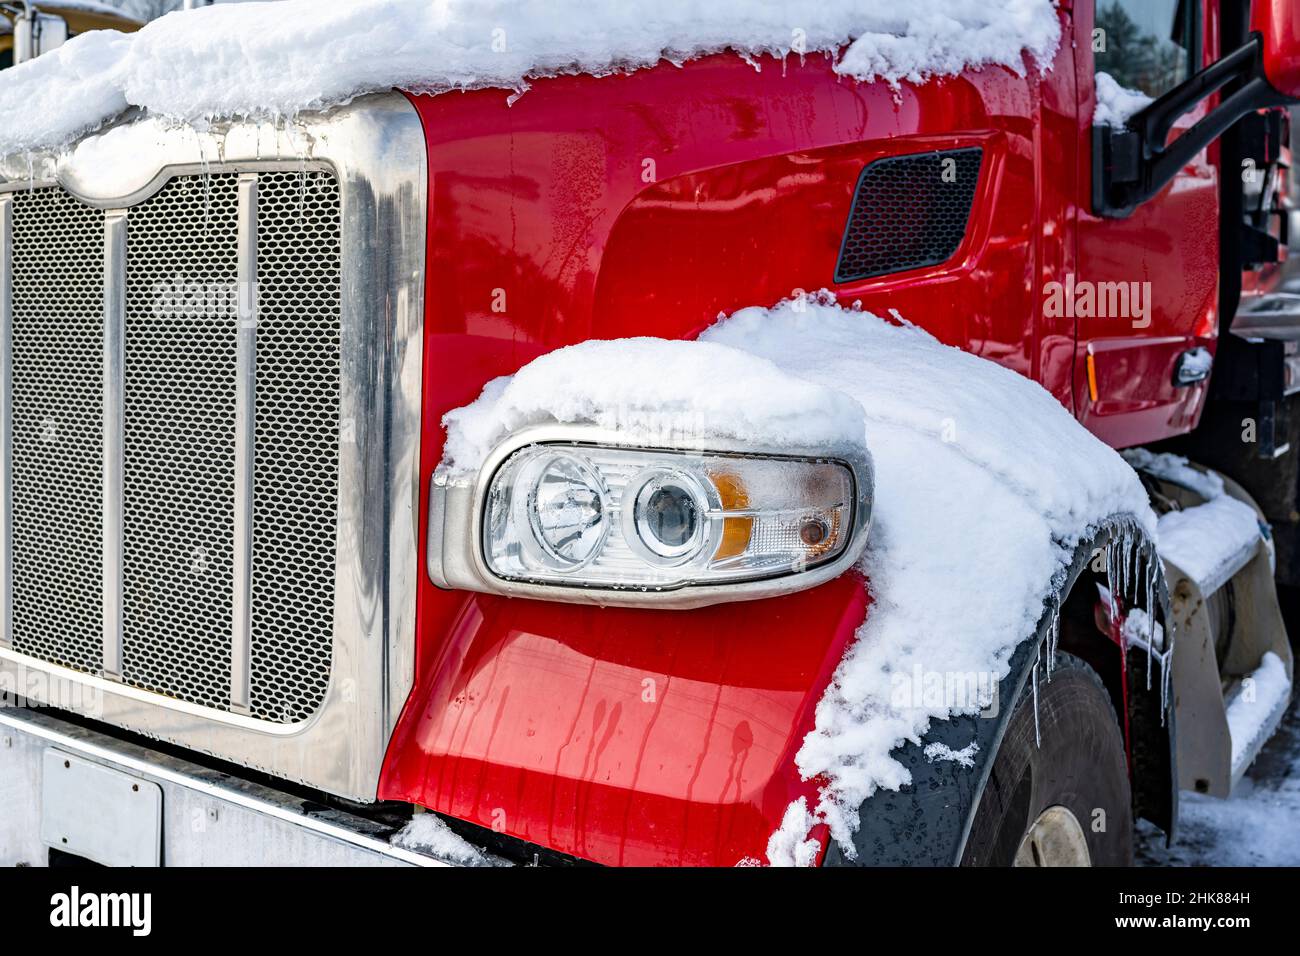 Red big rig classic semi truck tractor with chrome grille and accessories standing for truck driver rest on the industrial truck stop parking lot cove Stock Photo